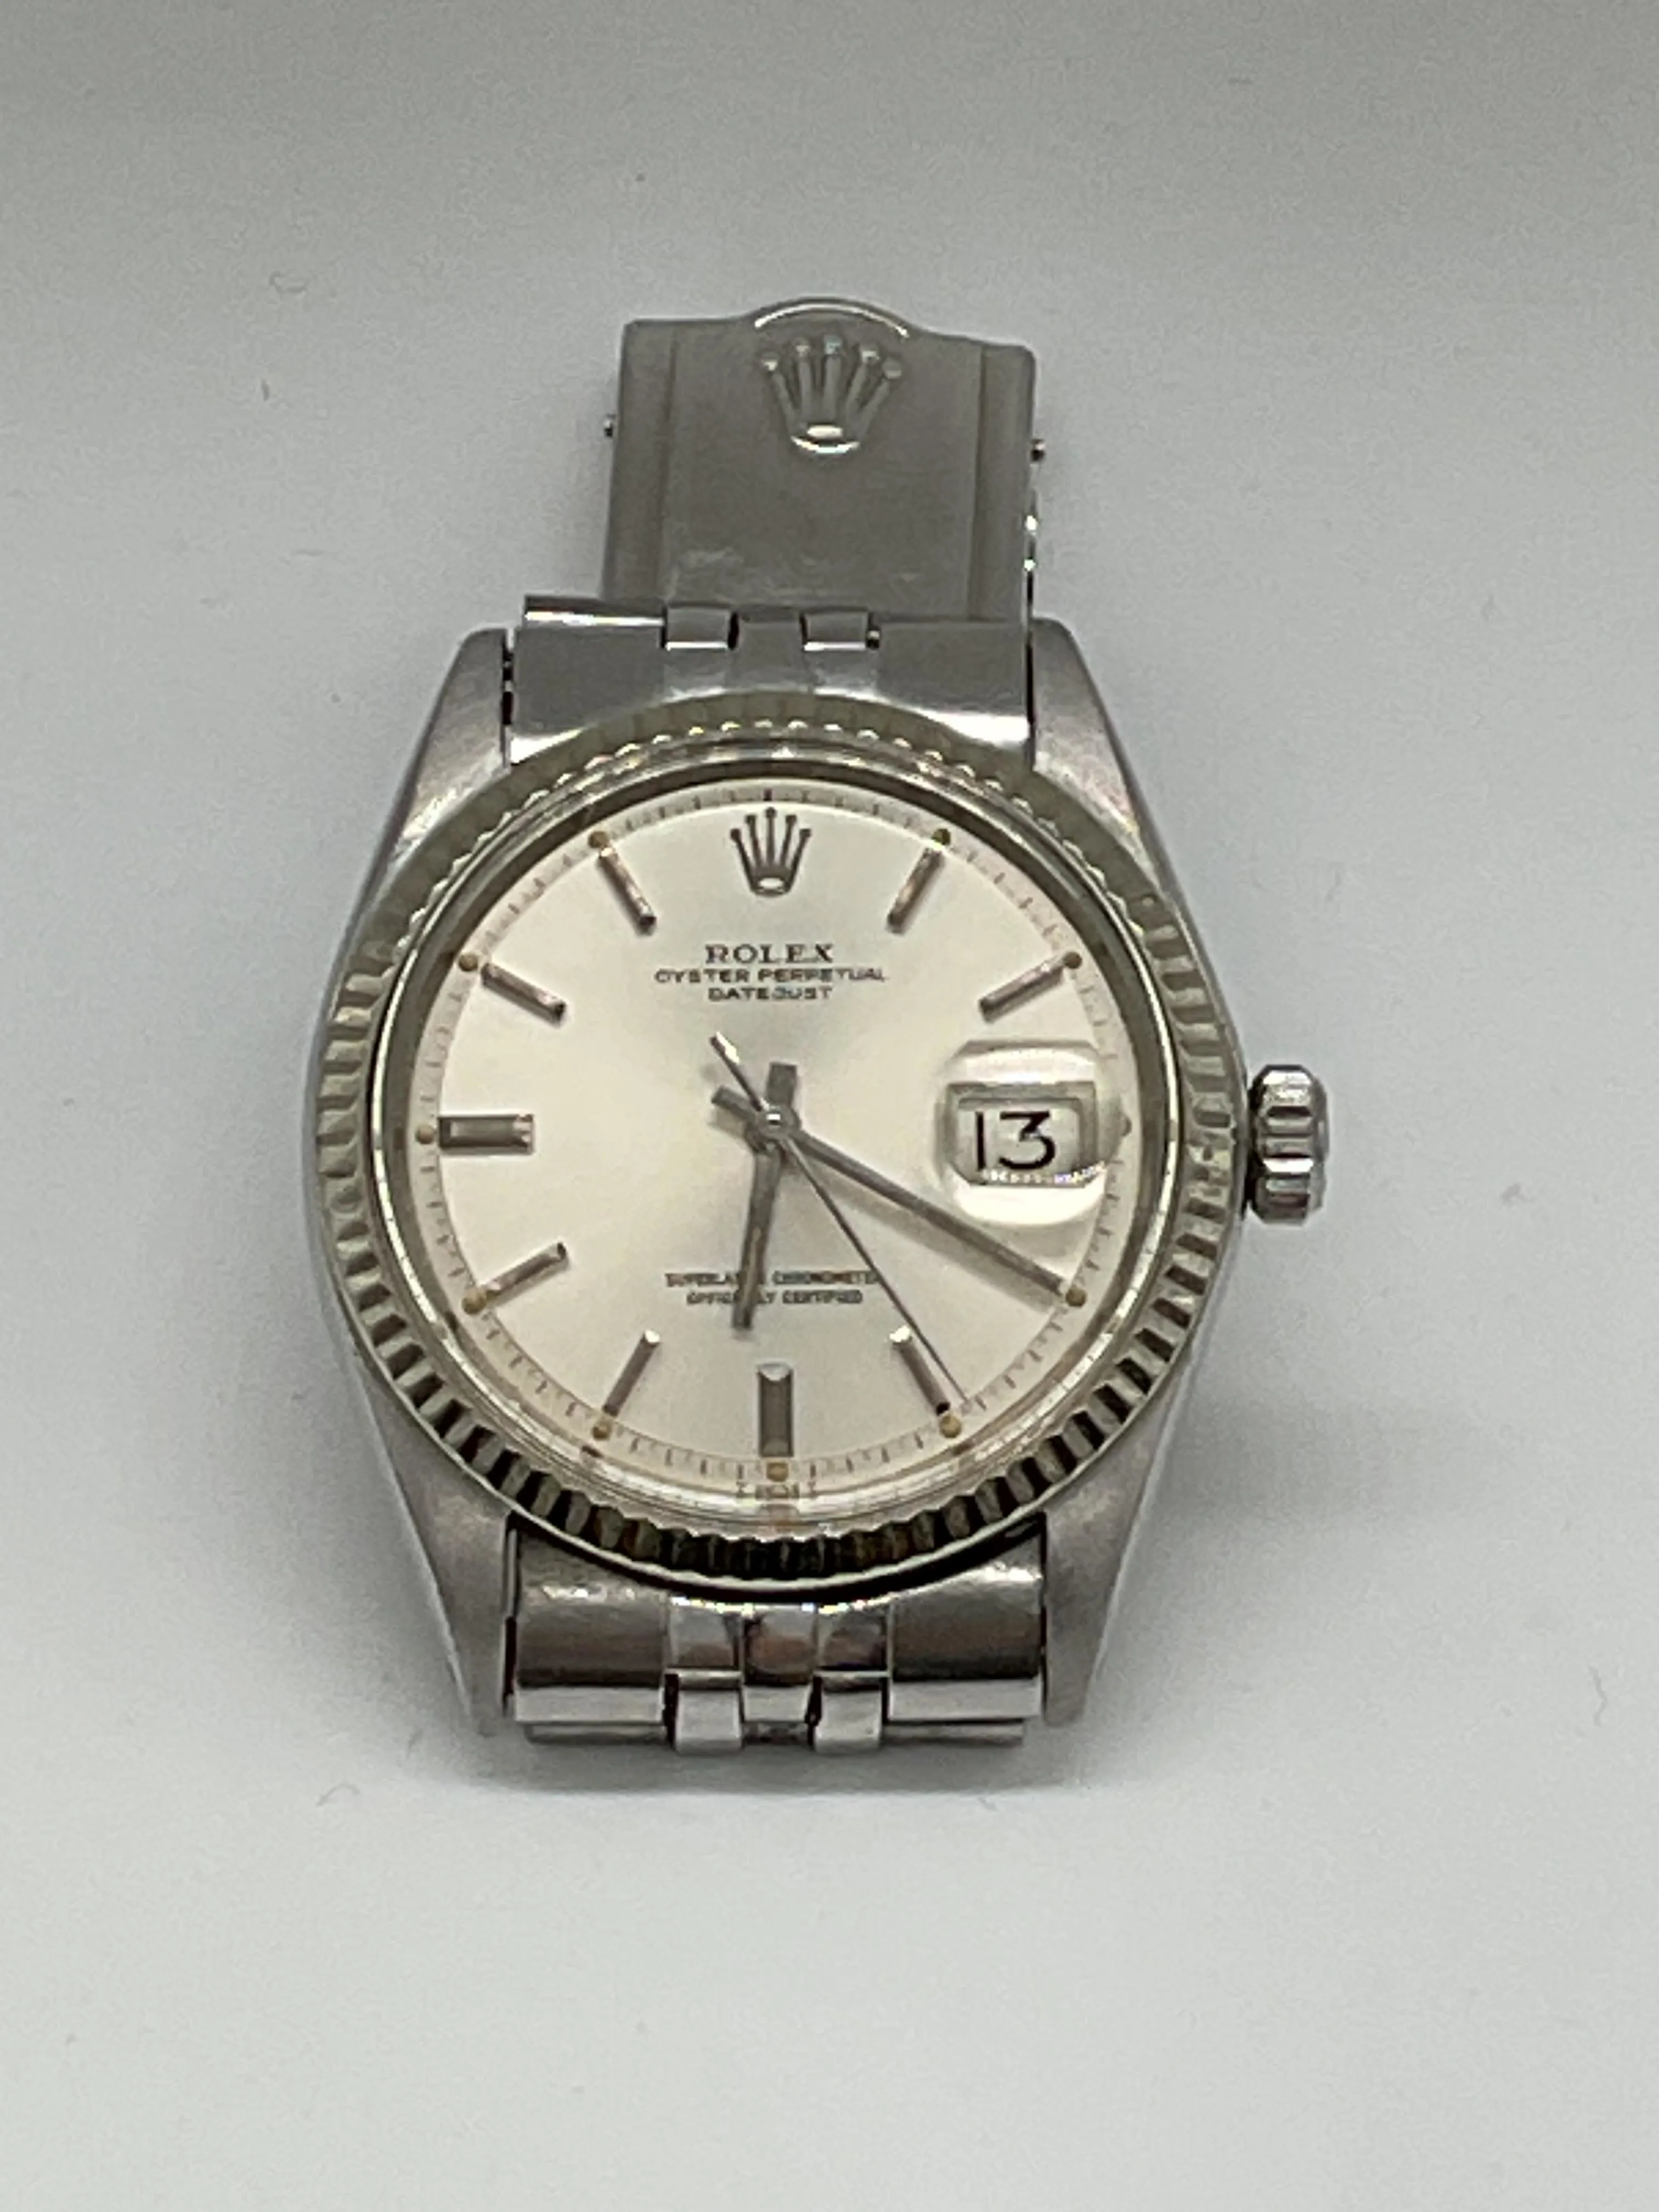 Rolex Oyster Perpetual "Datejust" nullmm